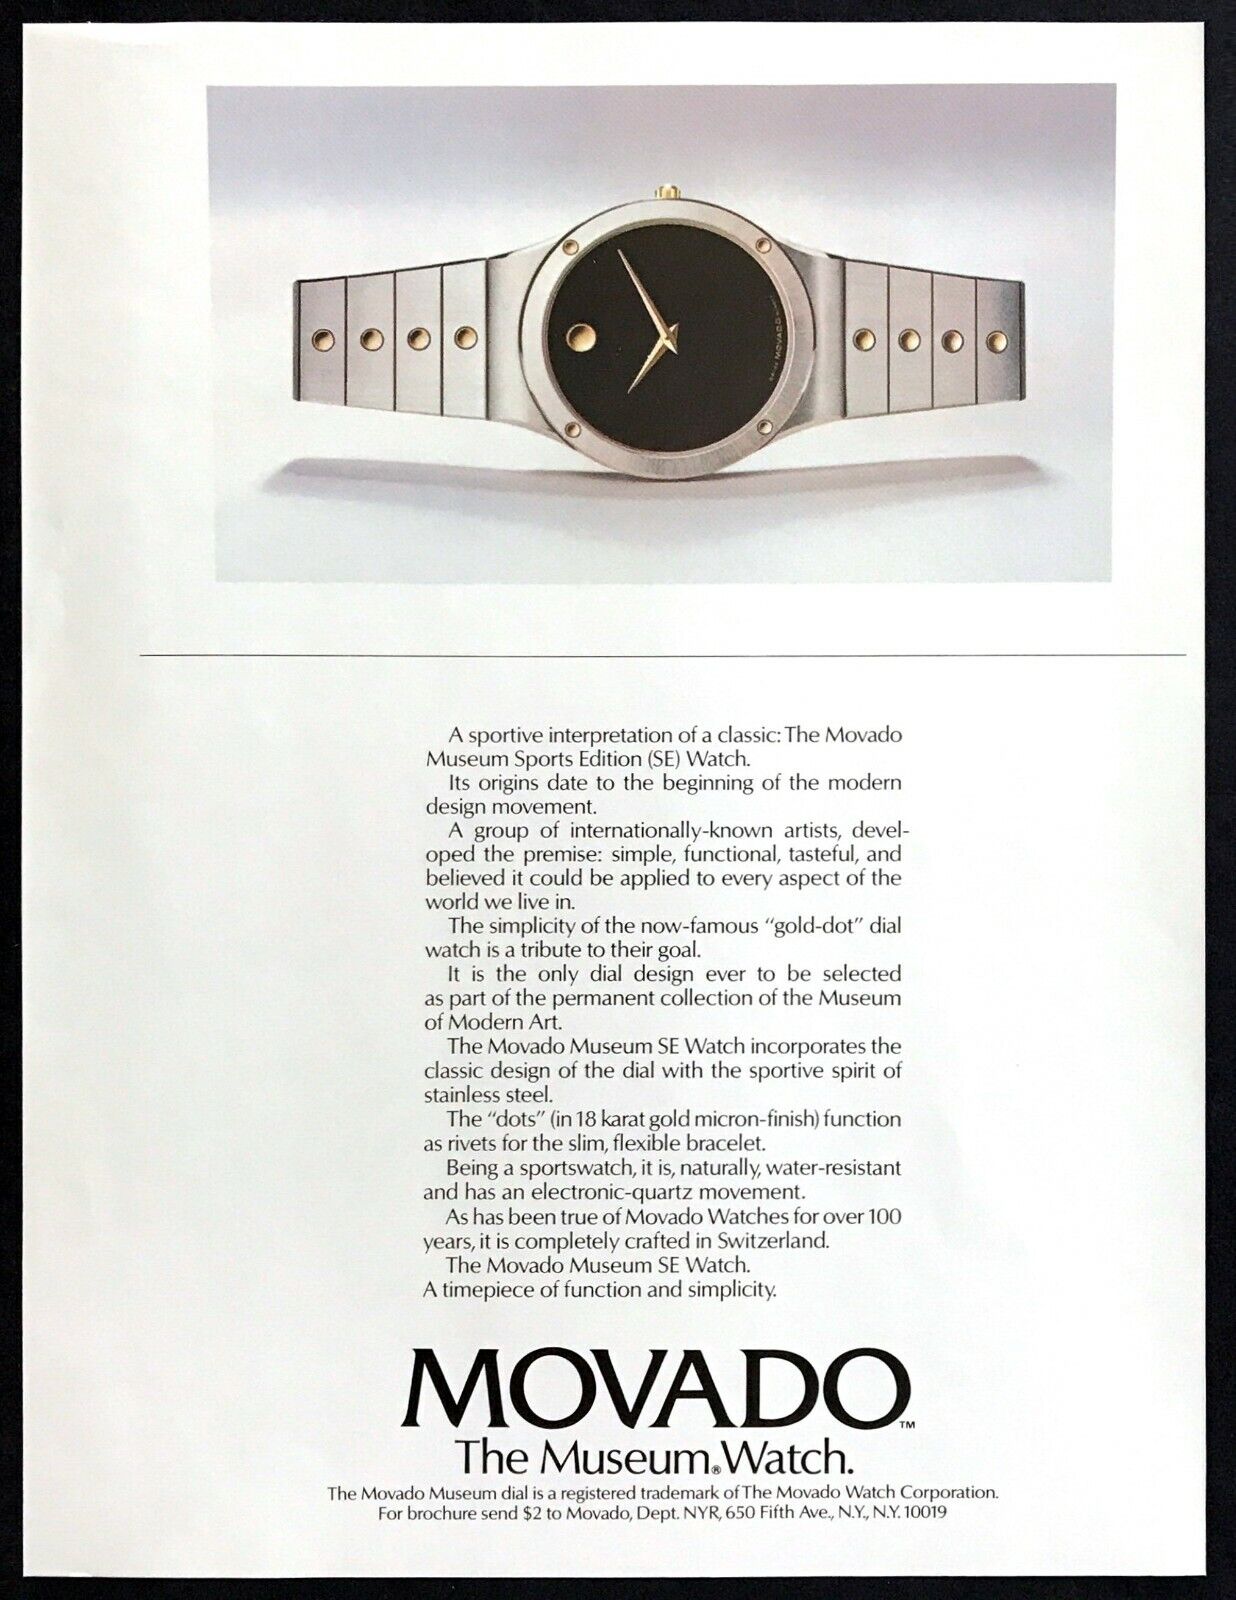 1987 Movado Museum Sports Edition SE Watch photo Gold Dot Dial vintage print ad